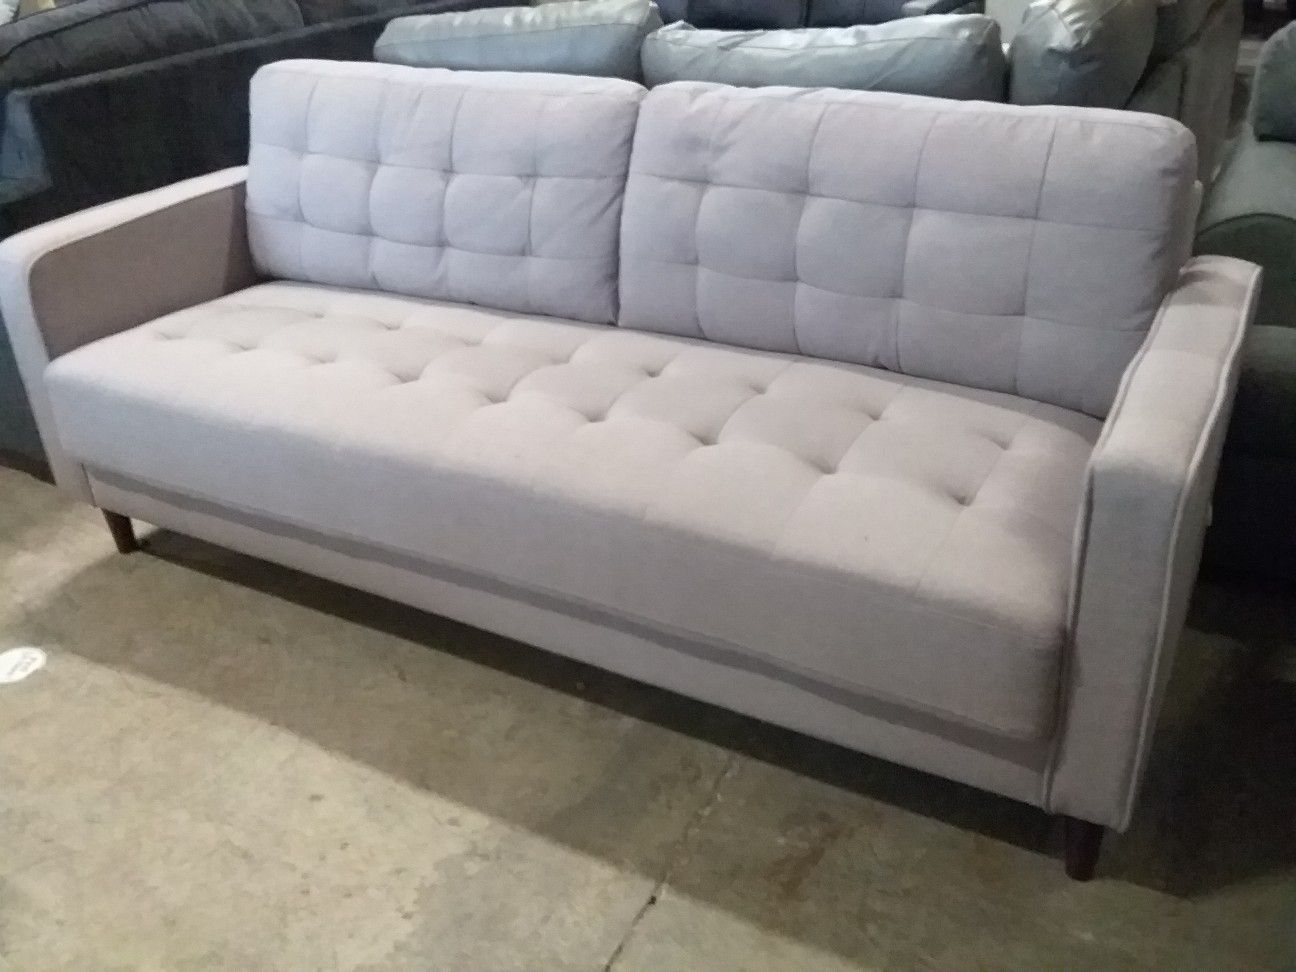 Brand new sofa tax included free delivery